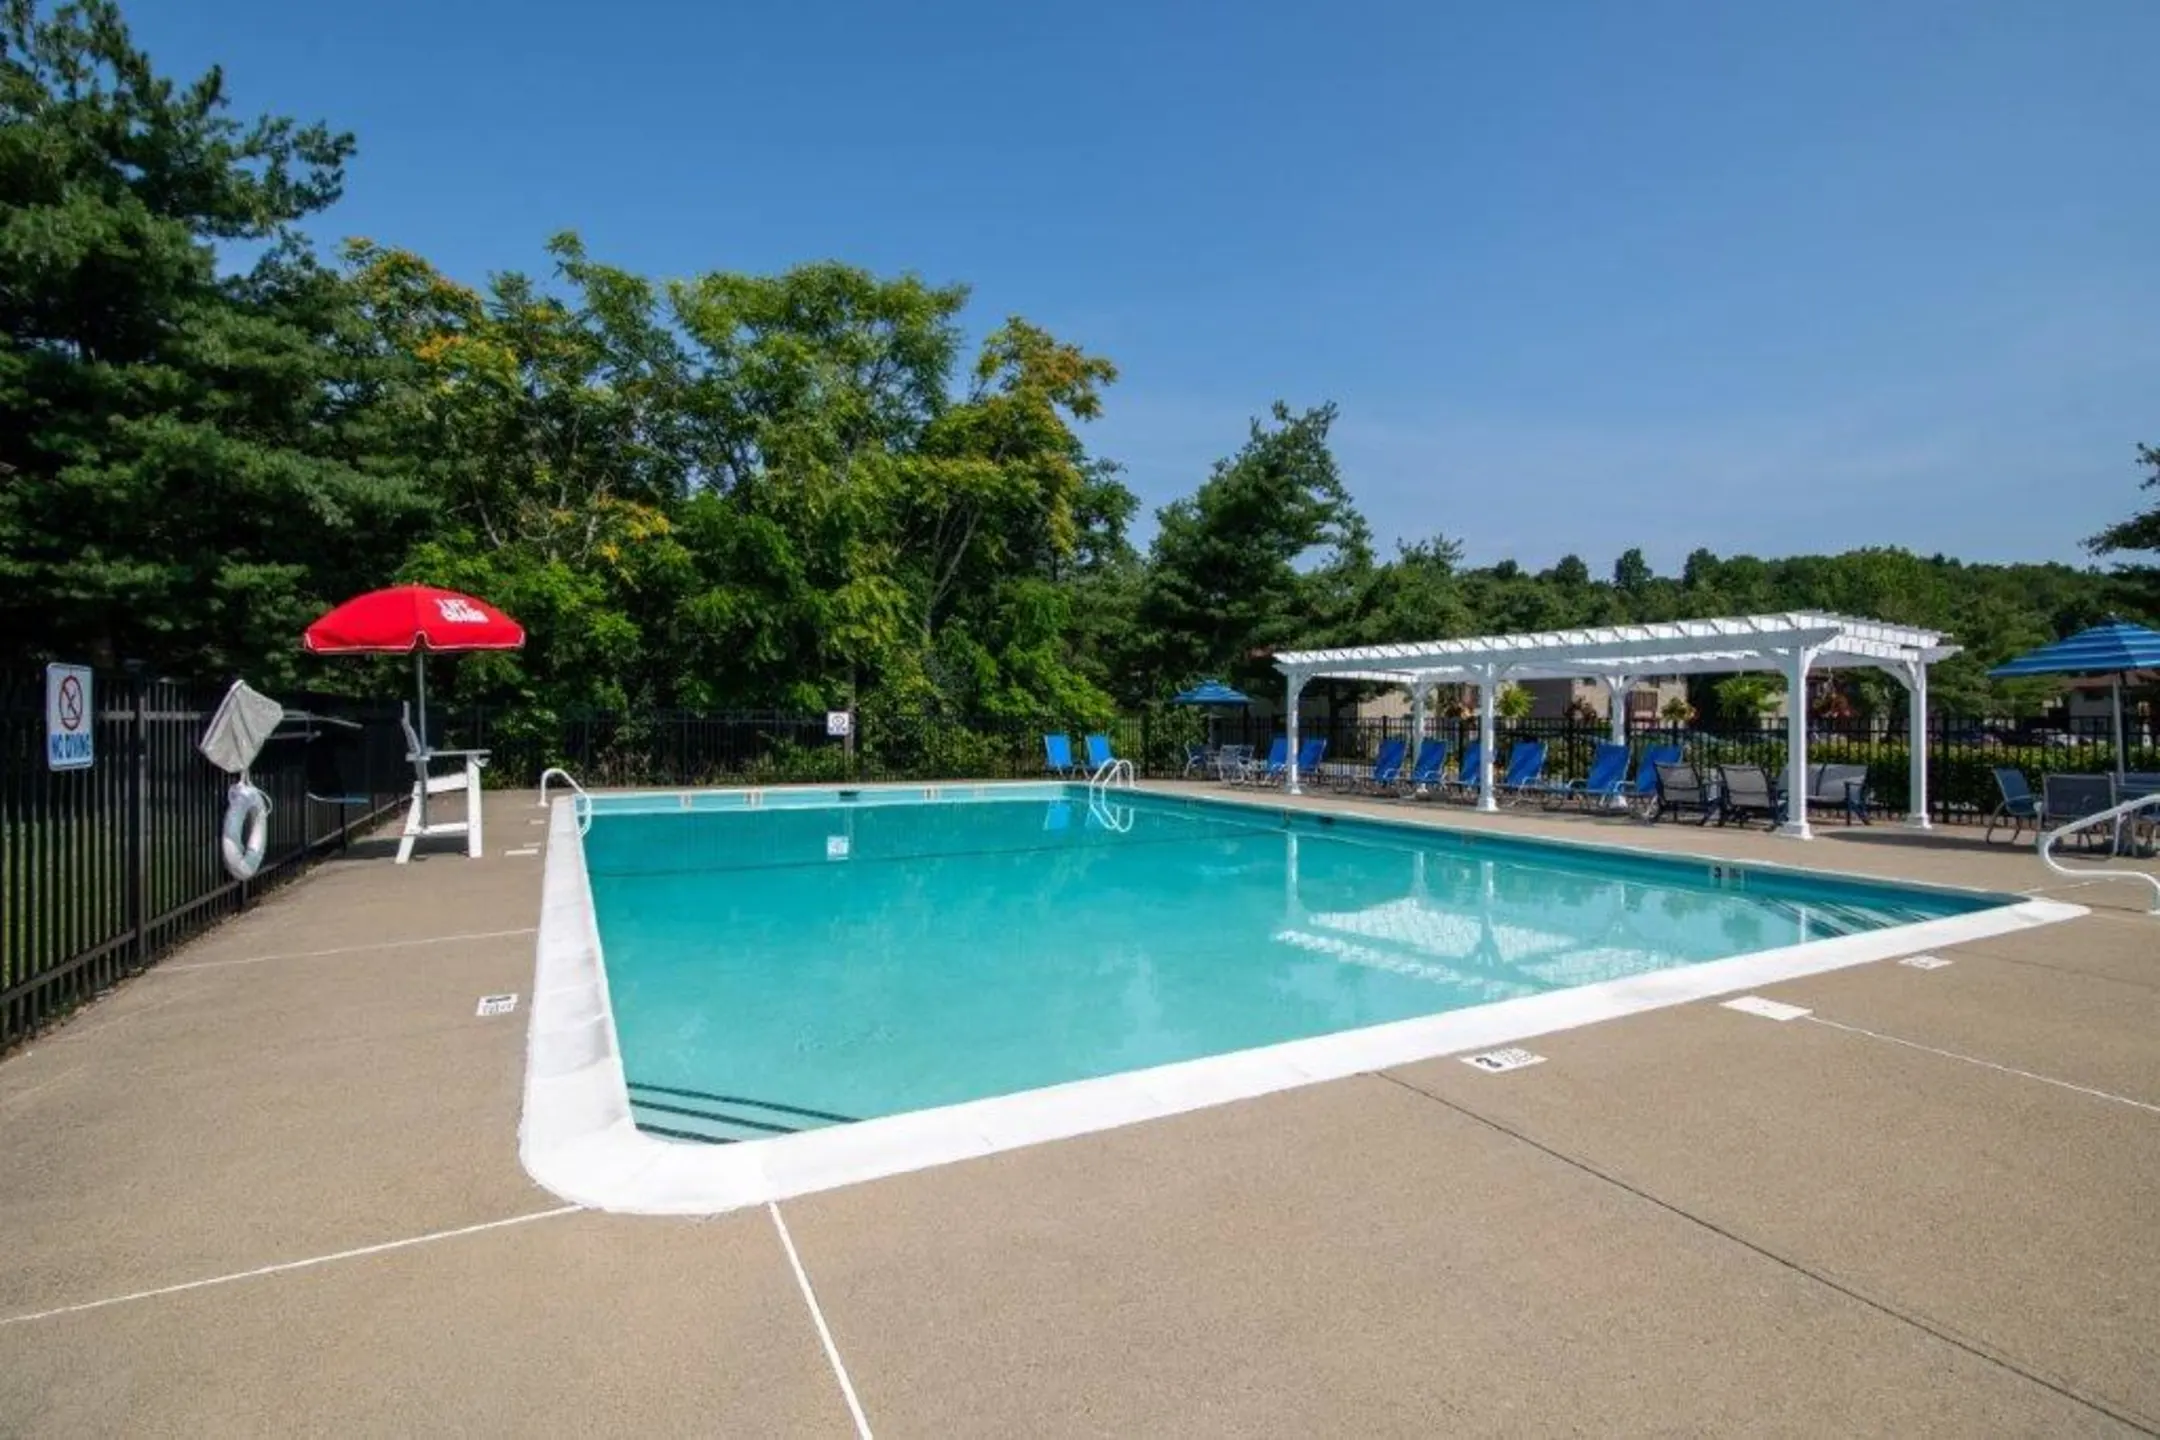 Pool - Imperial Gardens Apartment Homes - Middletown, NY